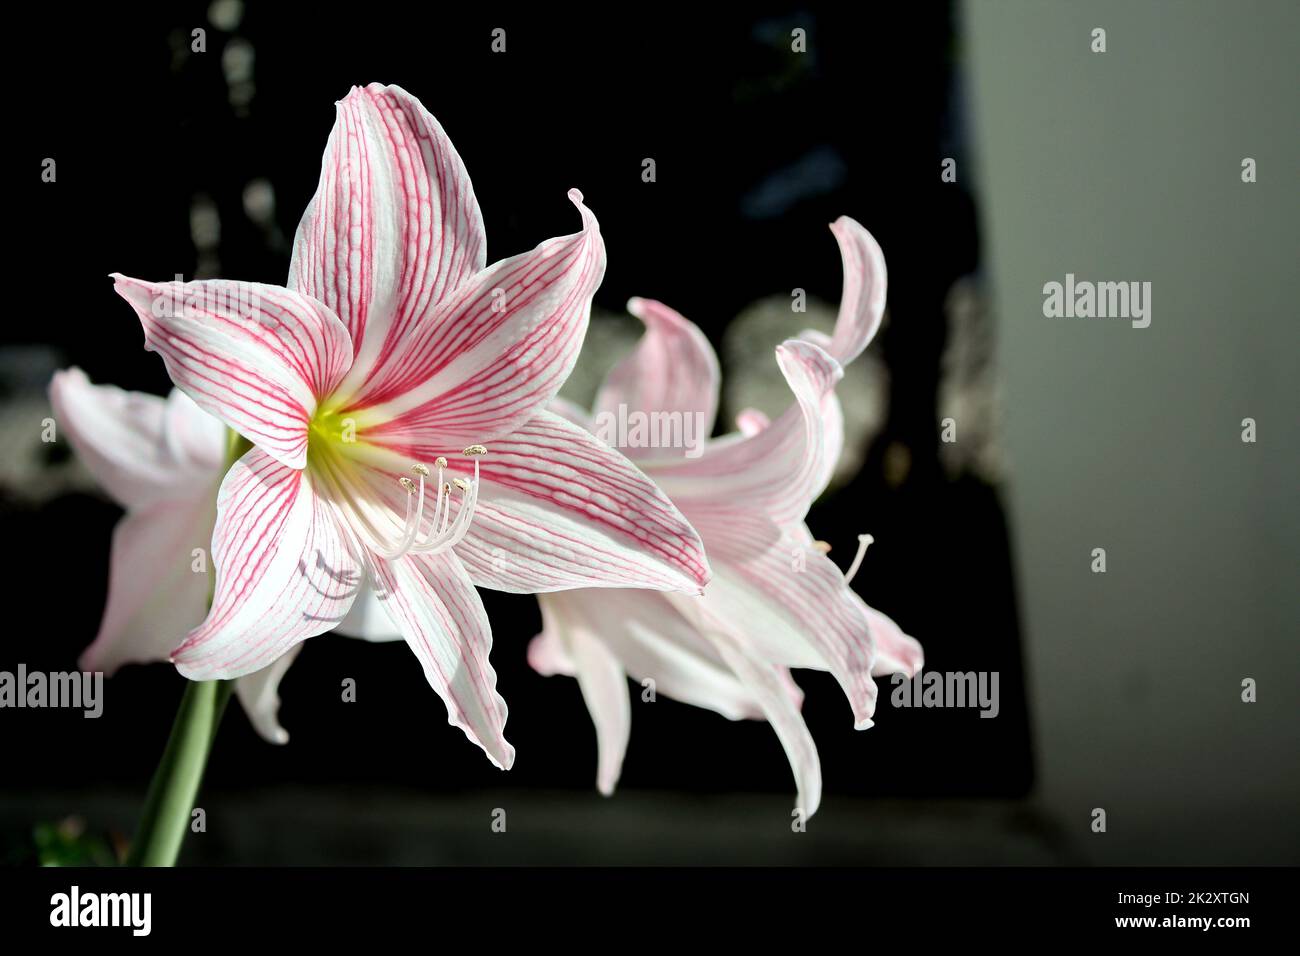 Hippeastrum johnsonii has a trunk as a head underground. There is a pink color at the end of the flower. The flower is separated into 6 petals. Selective focus. Stock Photo